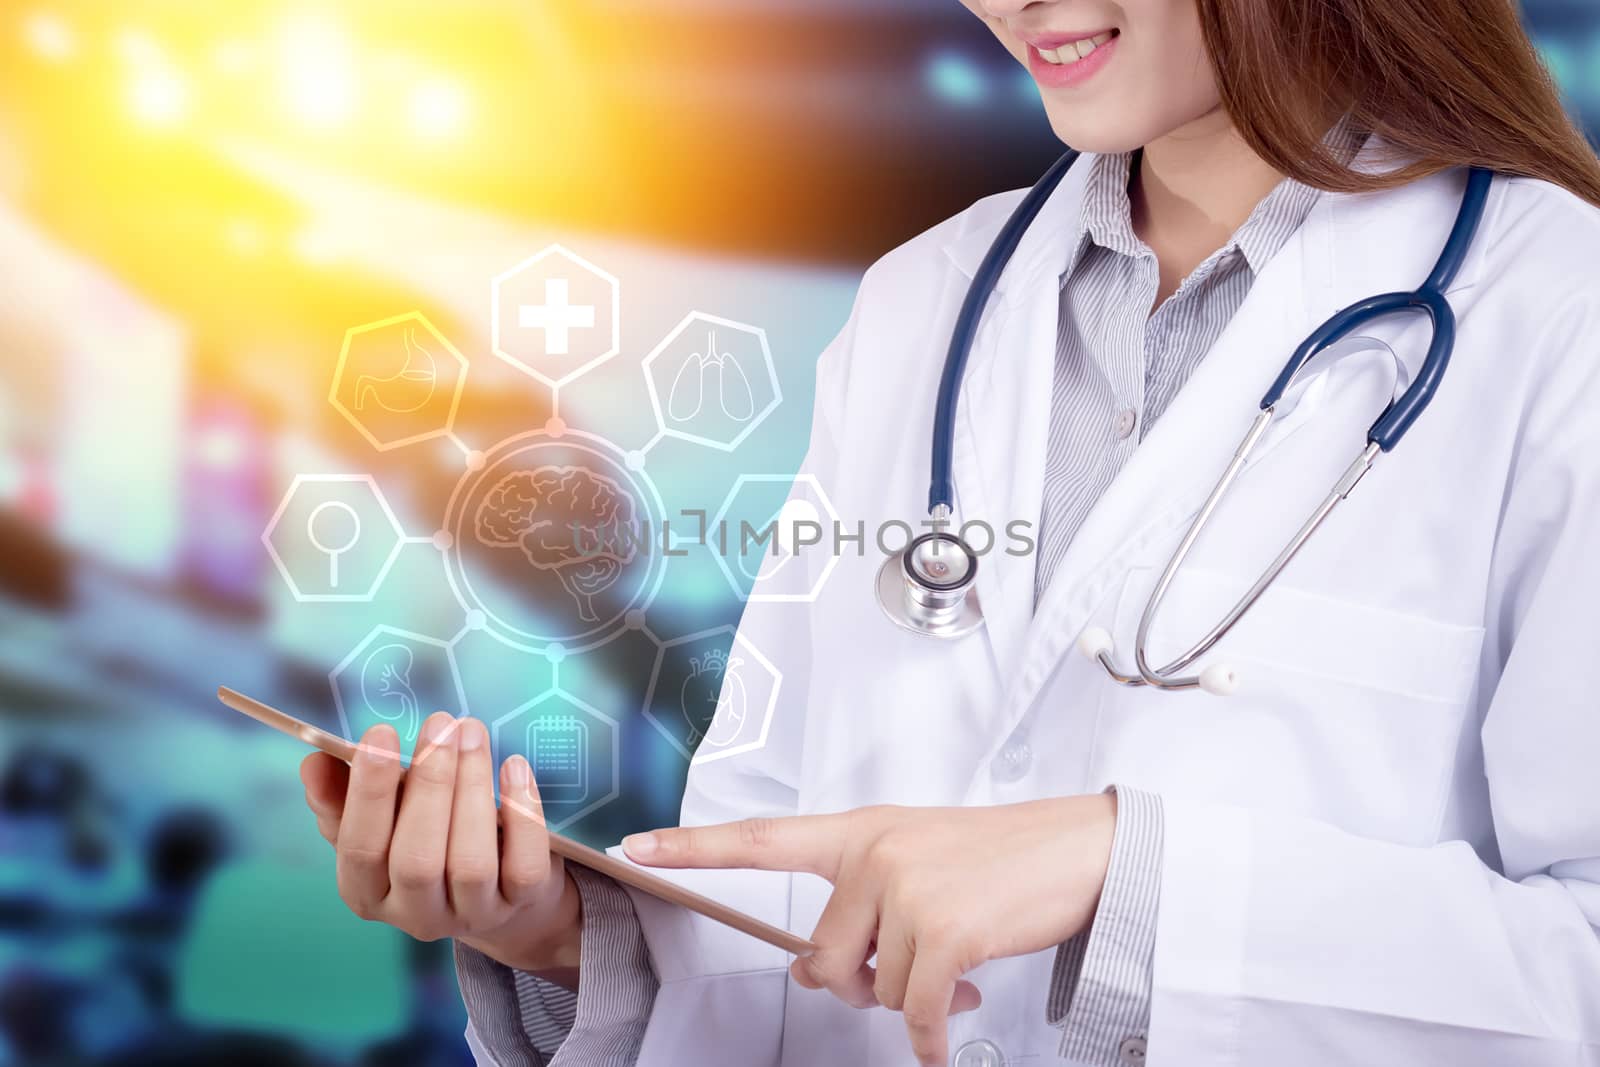 Healthy technology concept : Young Asian woman doctor using technology on tablet for patient chart with hologram graphic chart popup from tablet on doctor hand for patient consultants,  anonymous face